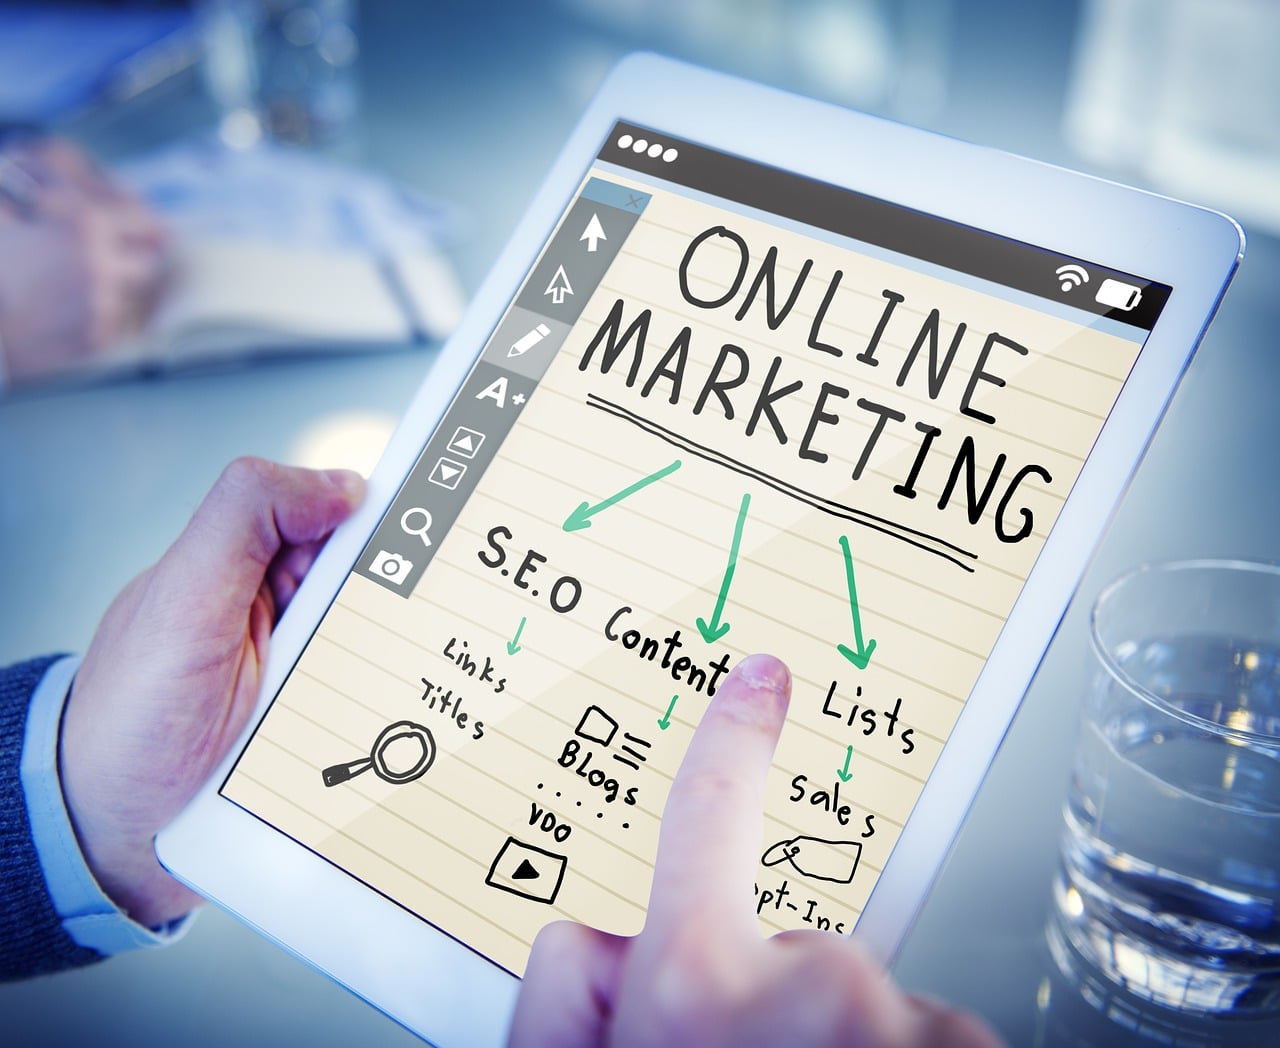 Online marketing helps real estate brands increase their visibility and generate more leads